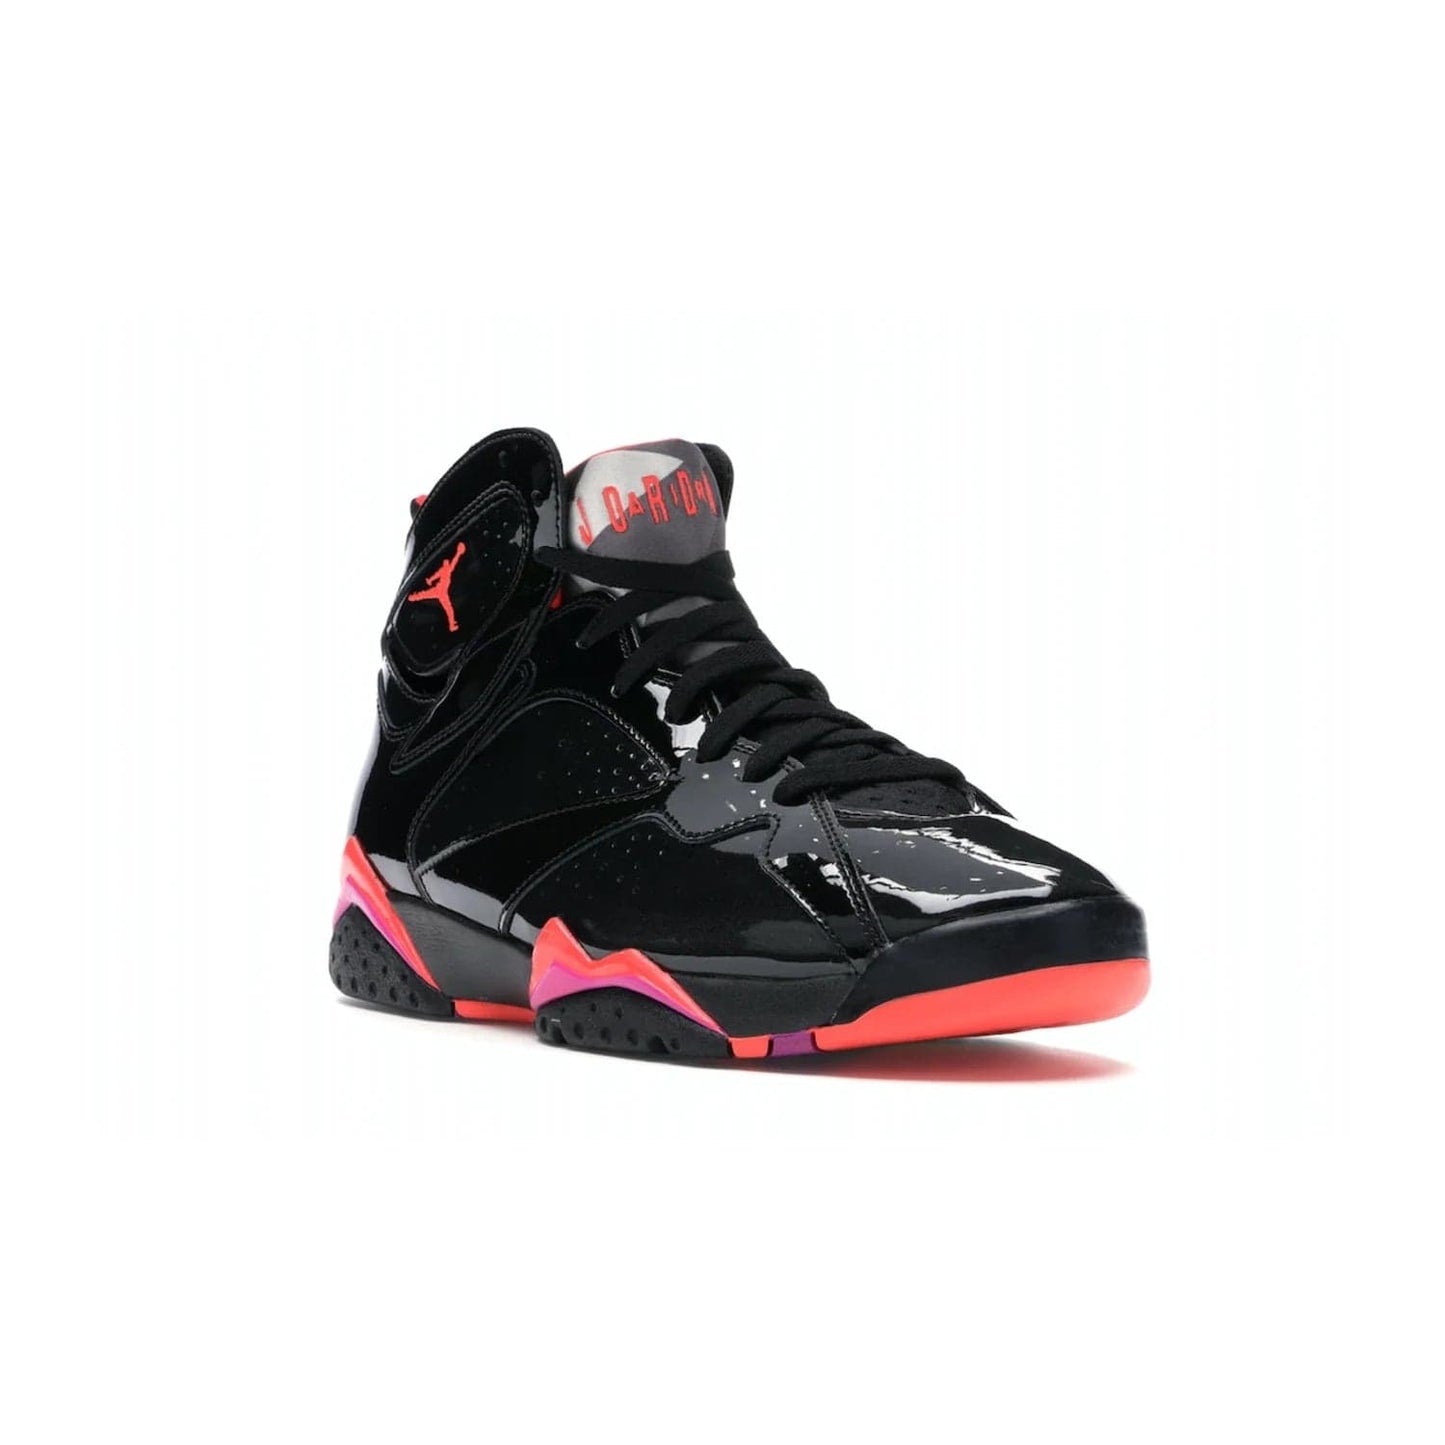 Jordan 7 Retro Black Patent (Women's) - Image 6 - Only at www.BallersClubKickz.com - #
Classic colorway! Shop the new Jordan 7 Retro Black Patent. Featuring a sleek combination of leather and patent leather upper, these shoes offer a bold yet luxurious look. Perfectly complete with a bright red Jumpman logo. Self-lacing Smart laces and Air-Sole cushion unit provide comfort and convenience.